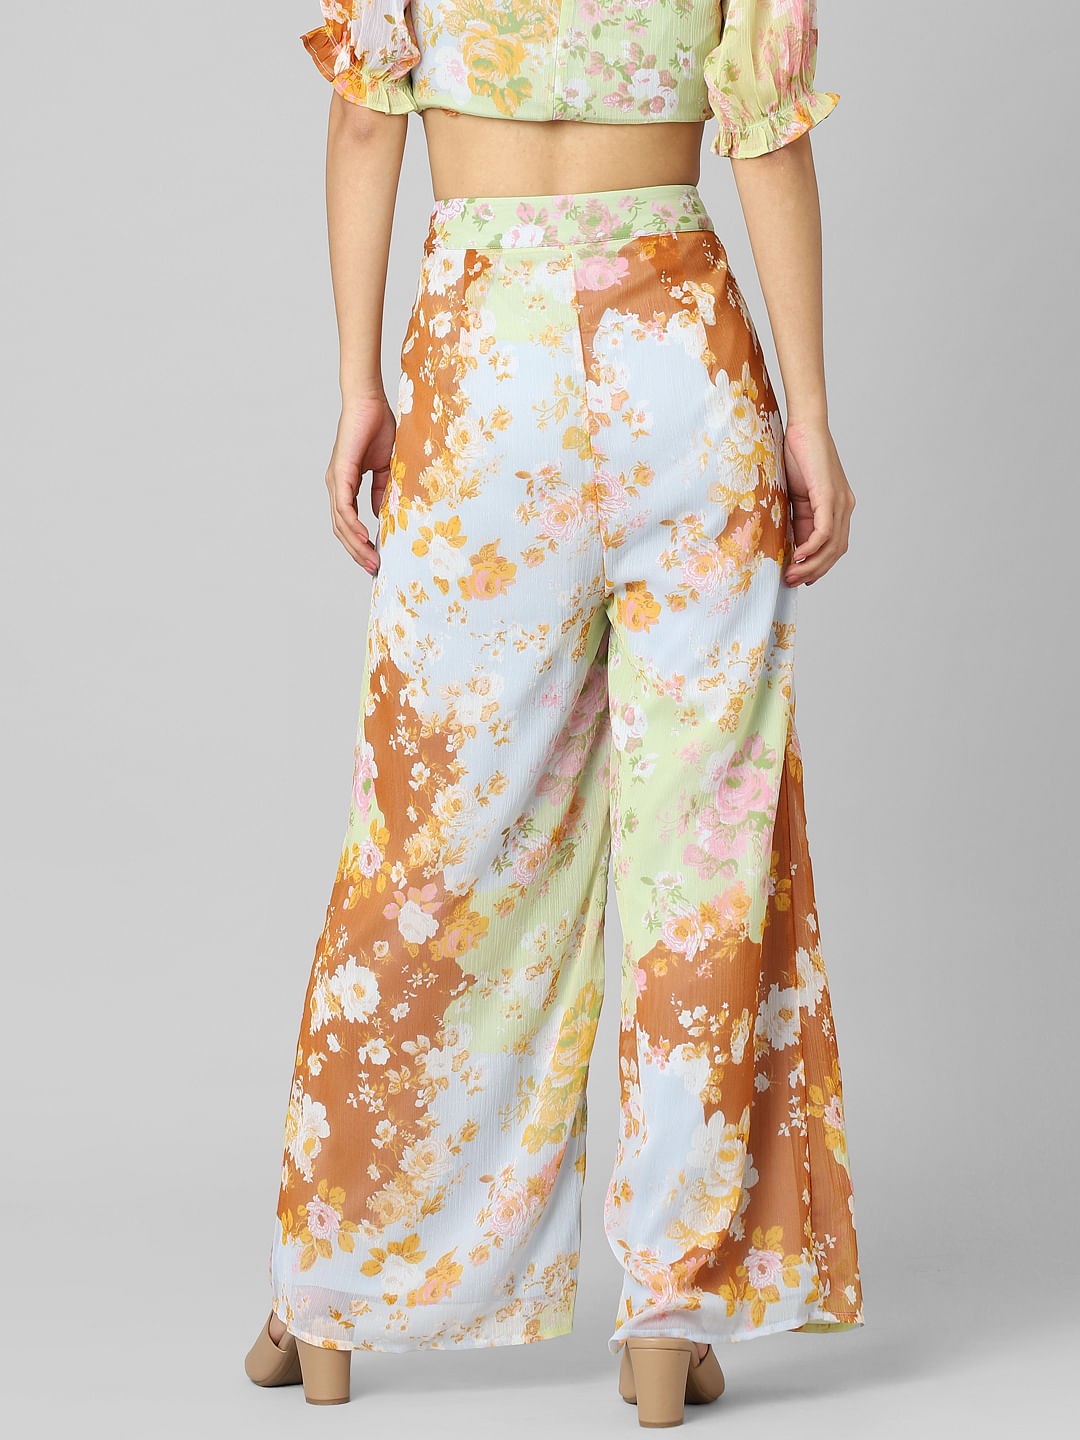 Styling Statement Pants  Floral WideLeg Silk Pants  Color  Chic  Floral  pants outfit Silk wide leg pants Printed wide leg pants